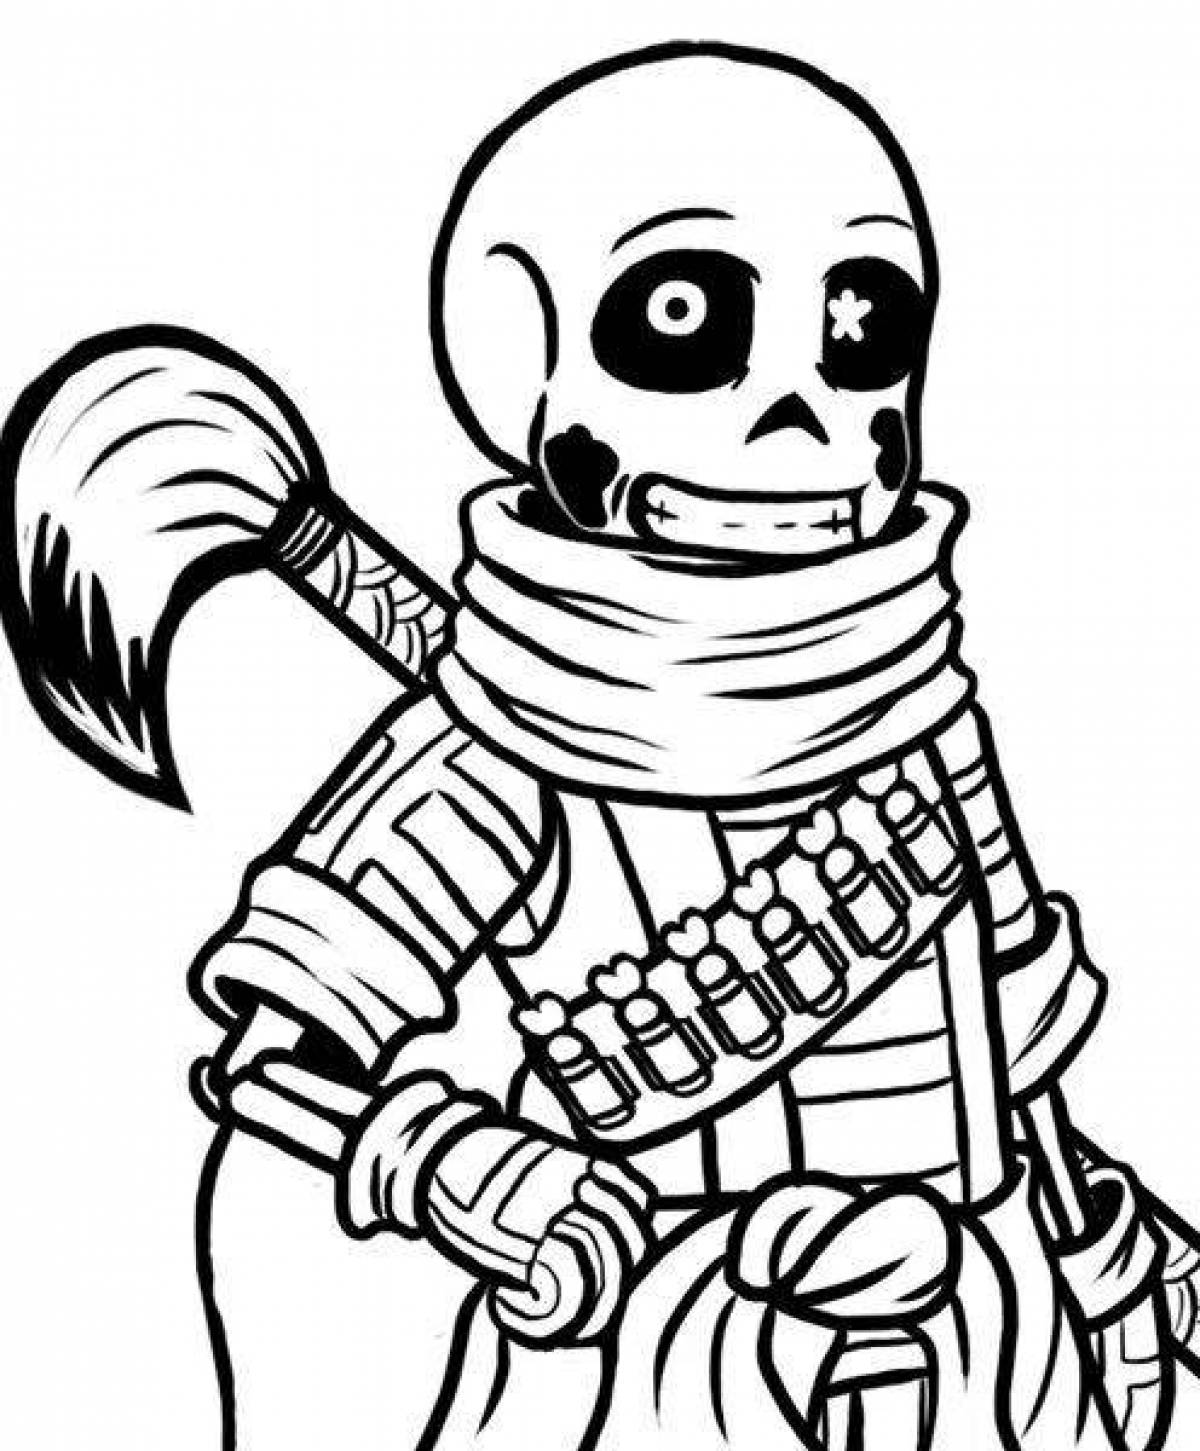 Ink sans coloring page